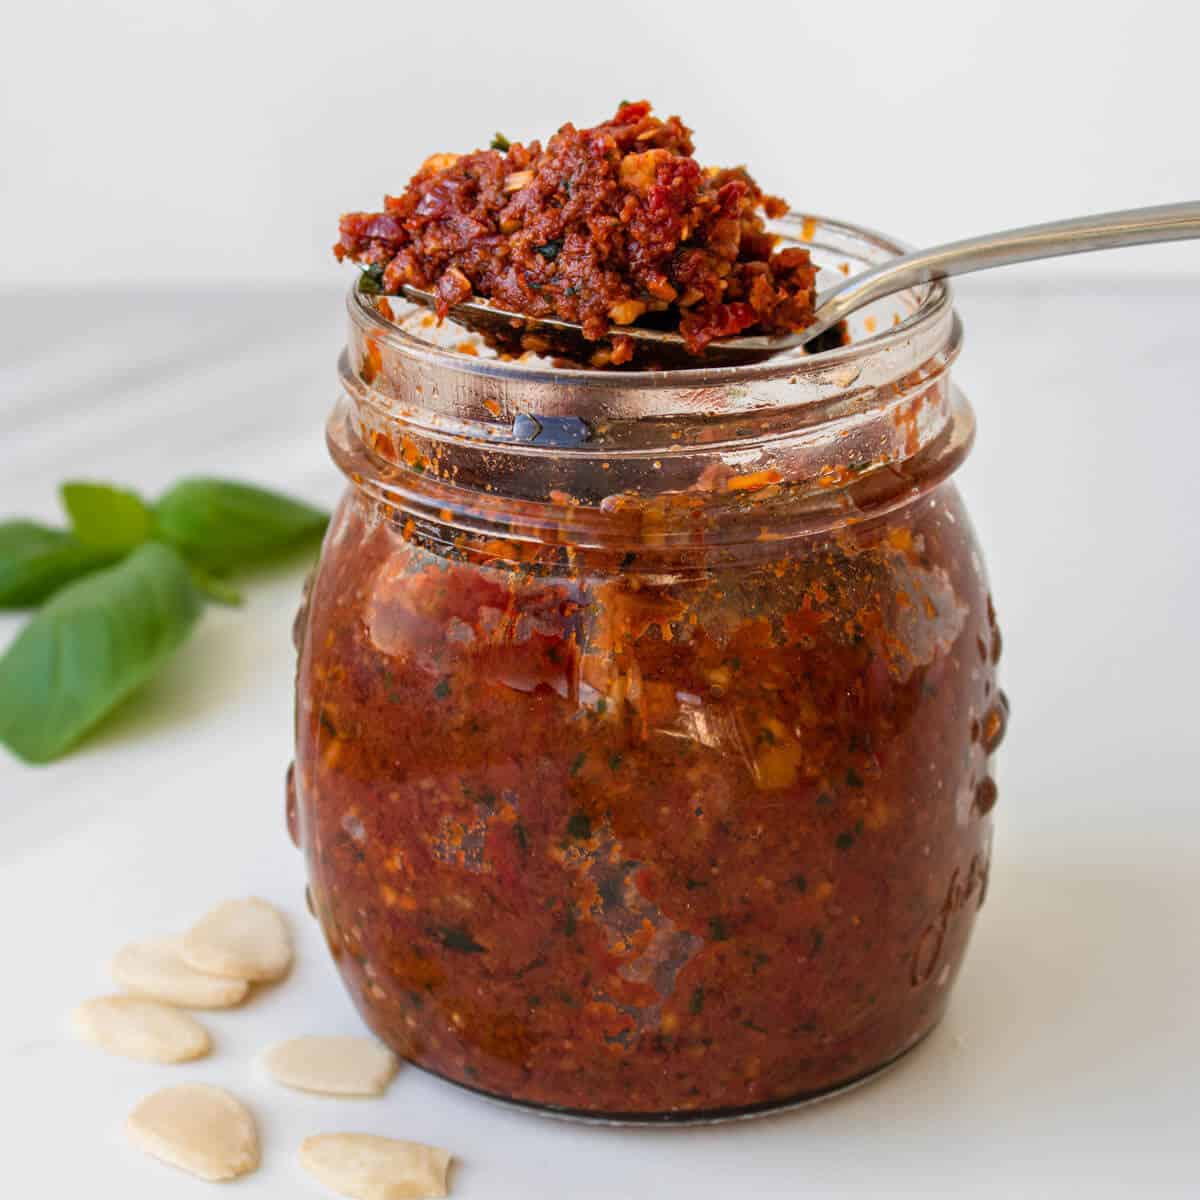 https://cookingwithayeh.com/wp-content/uploads/2021/05/Sun-Dried-Tomato-Pesto.jpg